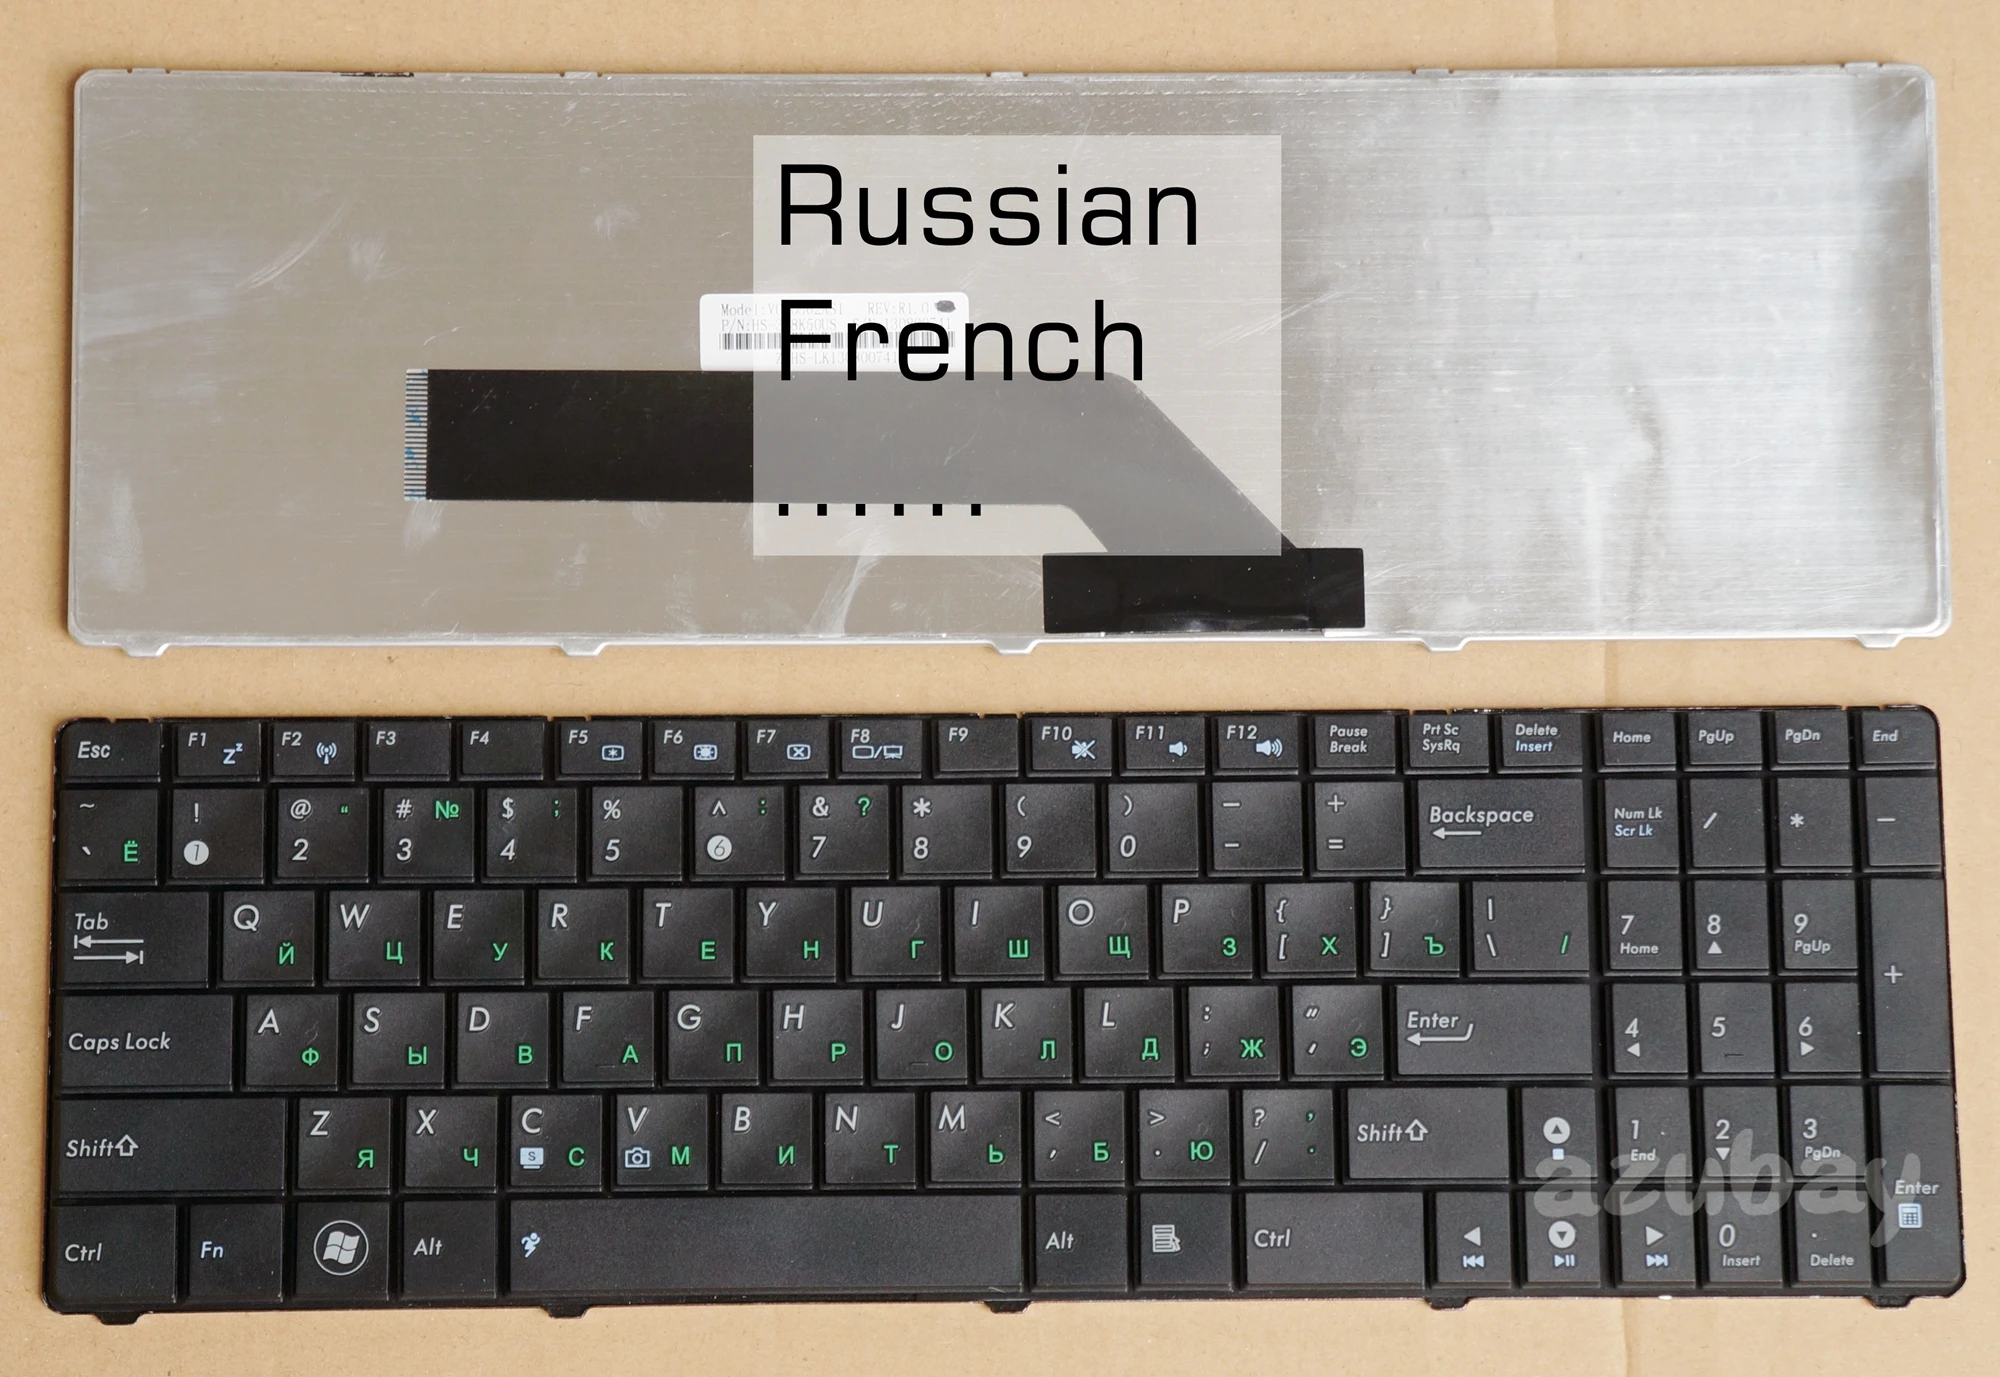 

French Russian Keyboard for Asus F52 F52A F52Q K50A K50AB K50AD K50ae K50AF K50C K50IE K50IJ K50IL K50IN K50IP K51A K51AB K51AC